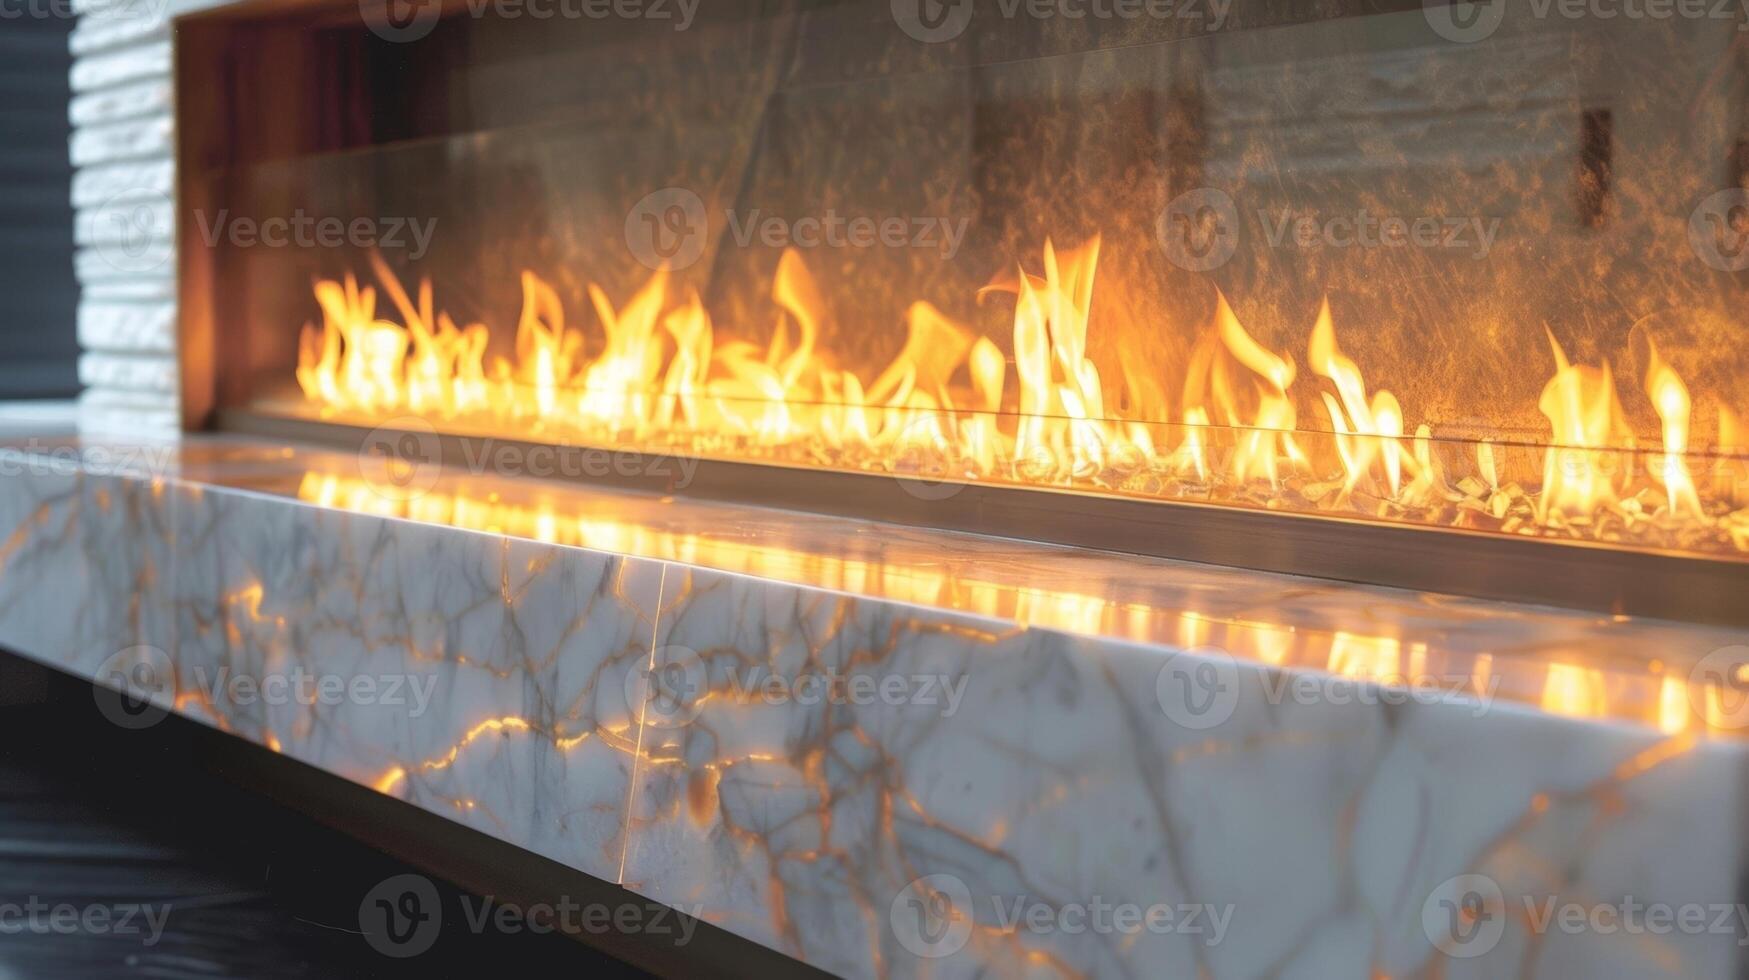 The flickering flames dance behind the glass doors of the fireplace while the marble surround reflects the light creating a mesmerizing display. 2d flat cartoon photo